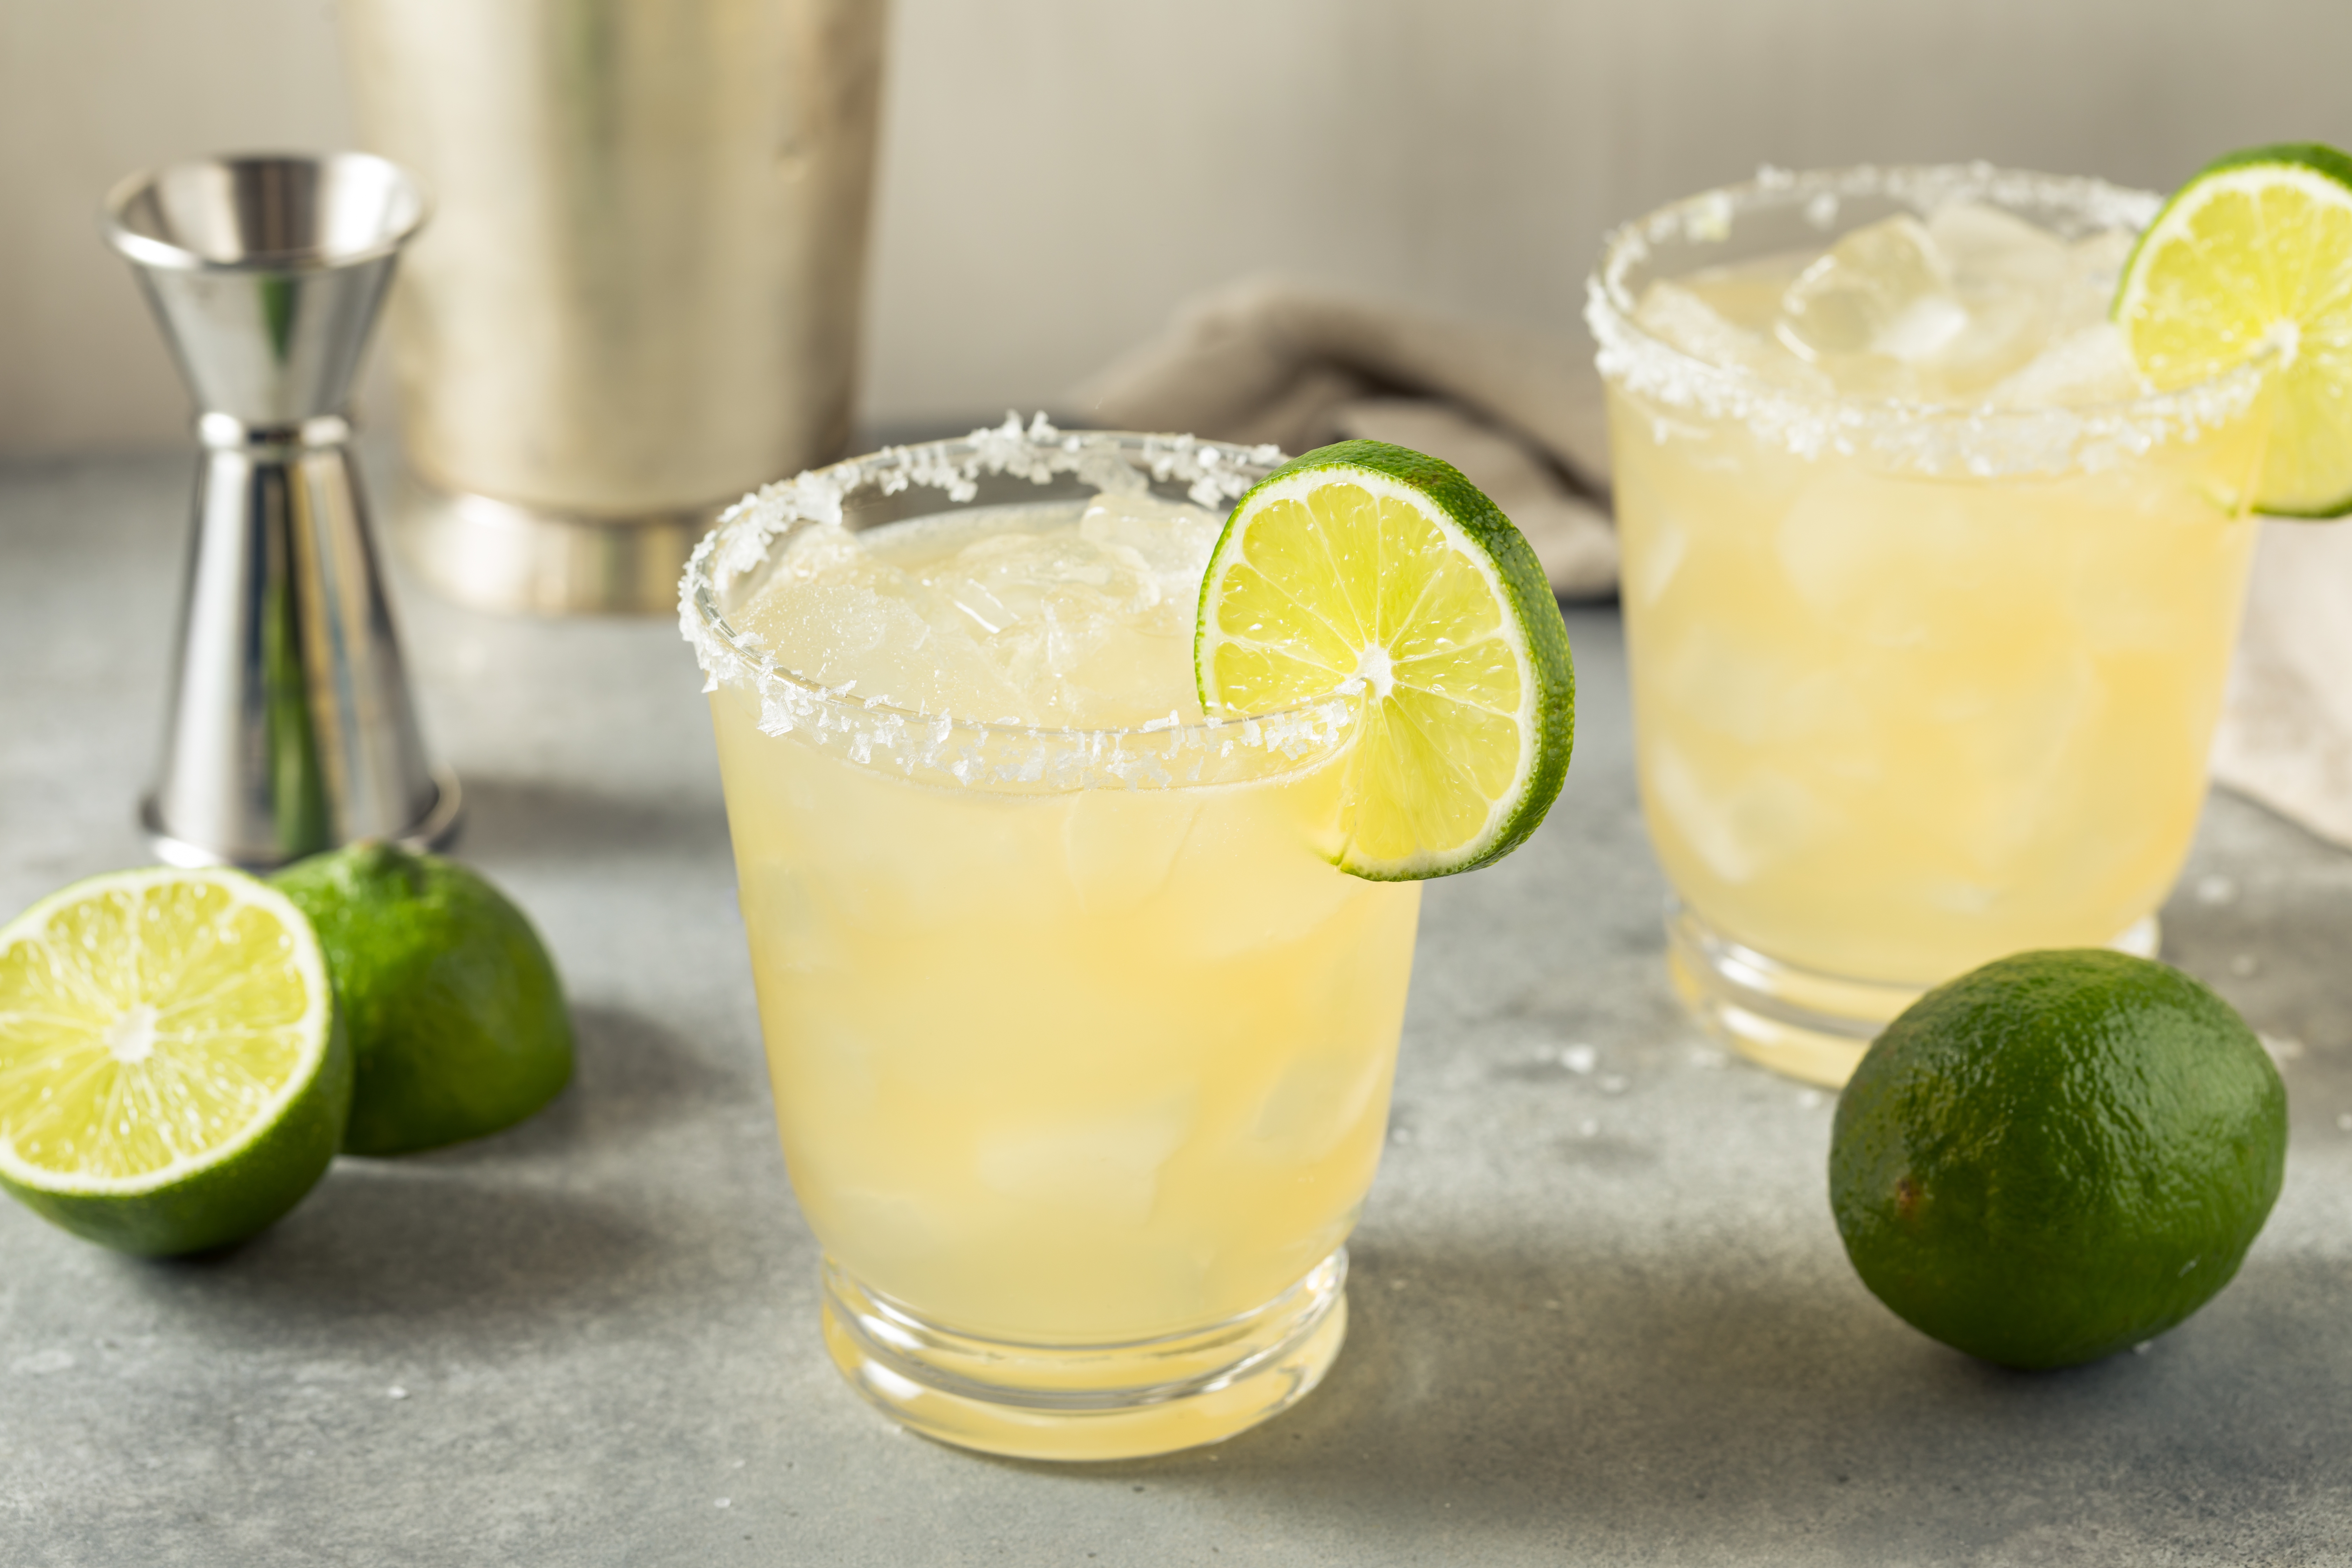 Two margaritas on a table | Source: Pexels